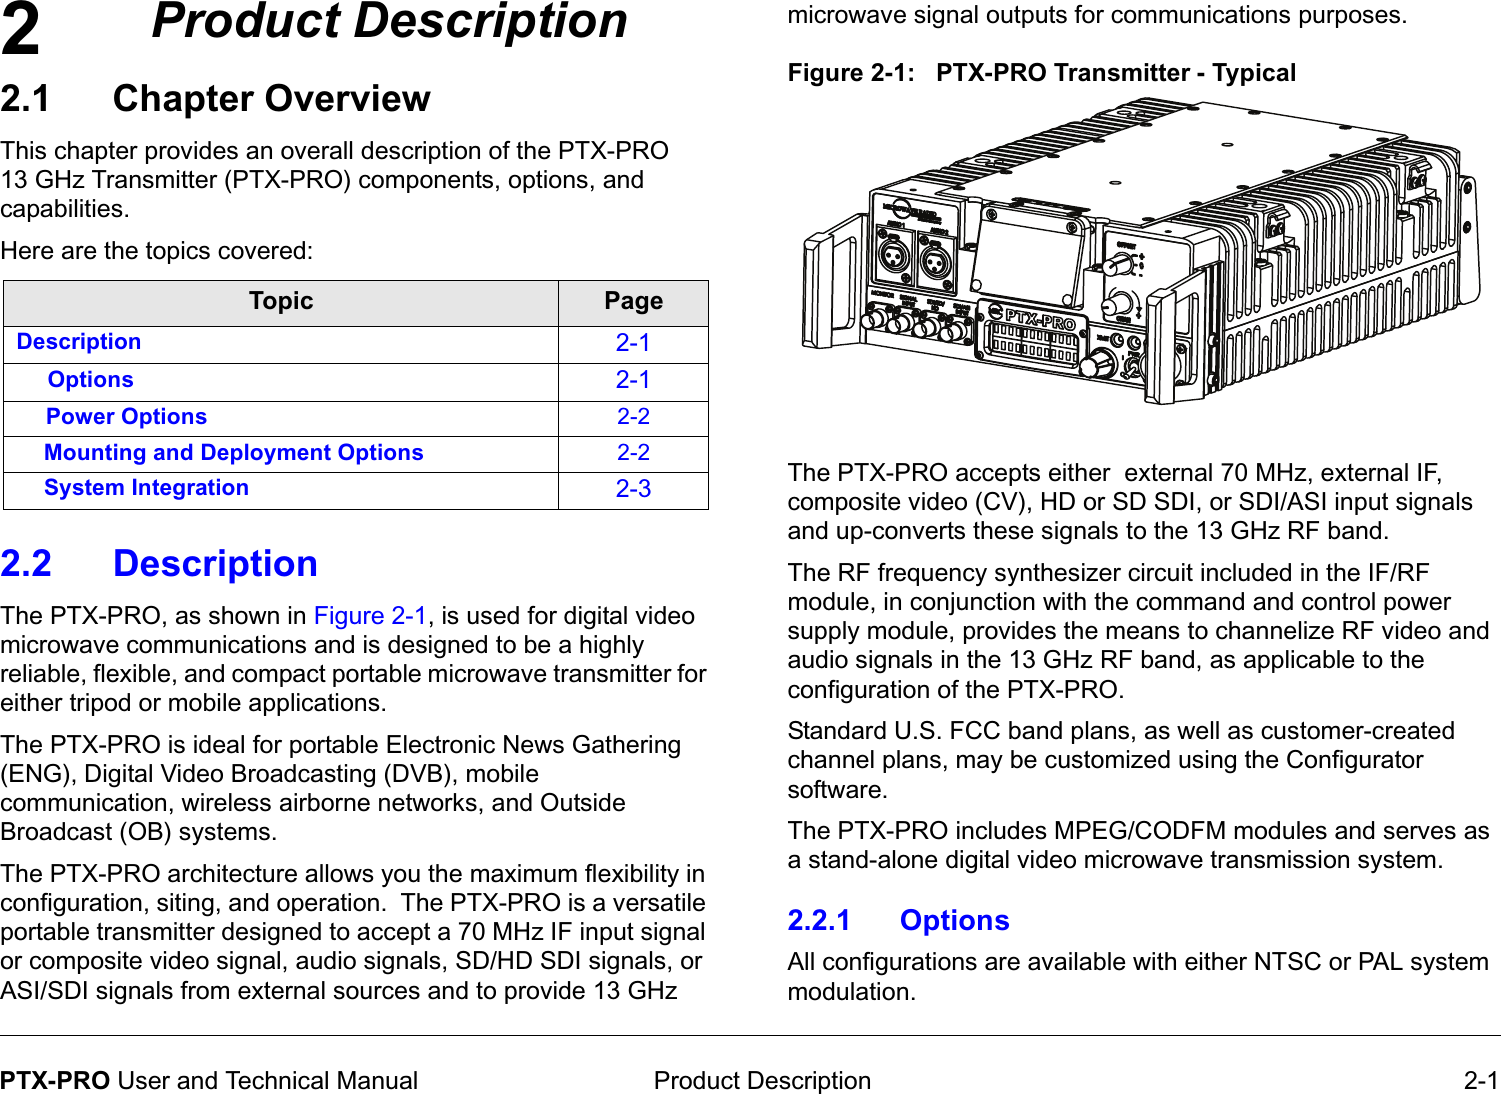 2 Product Description 2-1PTX-PRO User and Technical ManualProduct Description2.1 Chapter OverviewThis chapter provides an overall description of the PTX-PRO13 GHz Transmitter (PTX-PRO) components, options, and capabilities. Here are the topics covered:  2.2 Description The PTX-PRO, as shown in Figure 2-1, is used for digital video microwave communications and is designed to be a highly reliable, flexible, and compact portable microwave transmitter for either tripod or mobile applications. The PTX-PRO is ideal for portable Electronic News Gathering (ENG), Digital Video Broadcasting (DVB), mobile communication, wireless airborne networks, and Outside Broadcast (OB) systems. The PTX-PRO architecture allows you the maximum flexibility in configuration, siting, and operation.  The PTX-PRO is a versatile portable transmitter designed to accept a 70 MHz IF input signal or composite video signal, audio signals, SD/HD SDI signals, or ASI/SDI signals from external sources and to provide 13 GHz Topic PageDescription 2-1Options 2-1Power Options 2-2Mounting and Deployment Options 2-2System Integration 2-3microwave signal outputs for communications purposes.Figure 2-1:   PTX-PRO Transmitter - Typical   The PTX-PRO accepts either  external 70 MHz, external IF, composite video (CV), HD or SD SDI, or SDI/ASI input signals and up-converts these signals to the 13 GHz RF band. The RF frequency synthesizer circuit included in the IF/RF module, in conjunction with the command and control power supply module, provides the means to channelize RF video and audio signals in the 13 GHz RF band, as applicable to the configuration of the PTX-PRO.Standard U.S. FCC band plans, as well as customer-created channel plans, may be customized using the Configurator software.The PTX-PRO includes MPEG/CODFM modules and serves as a stand-alone digital video microwave transmission system. 2.2.1 OptionsAll configurations are available with either NTSC or PAL system modulation.  